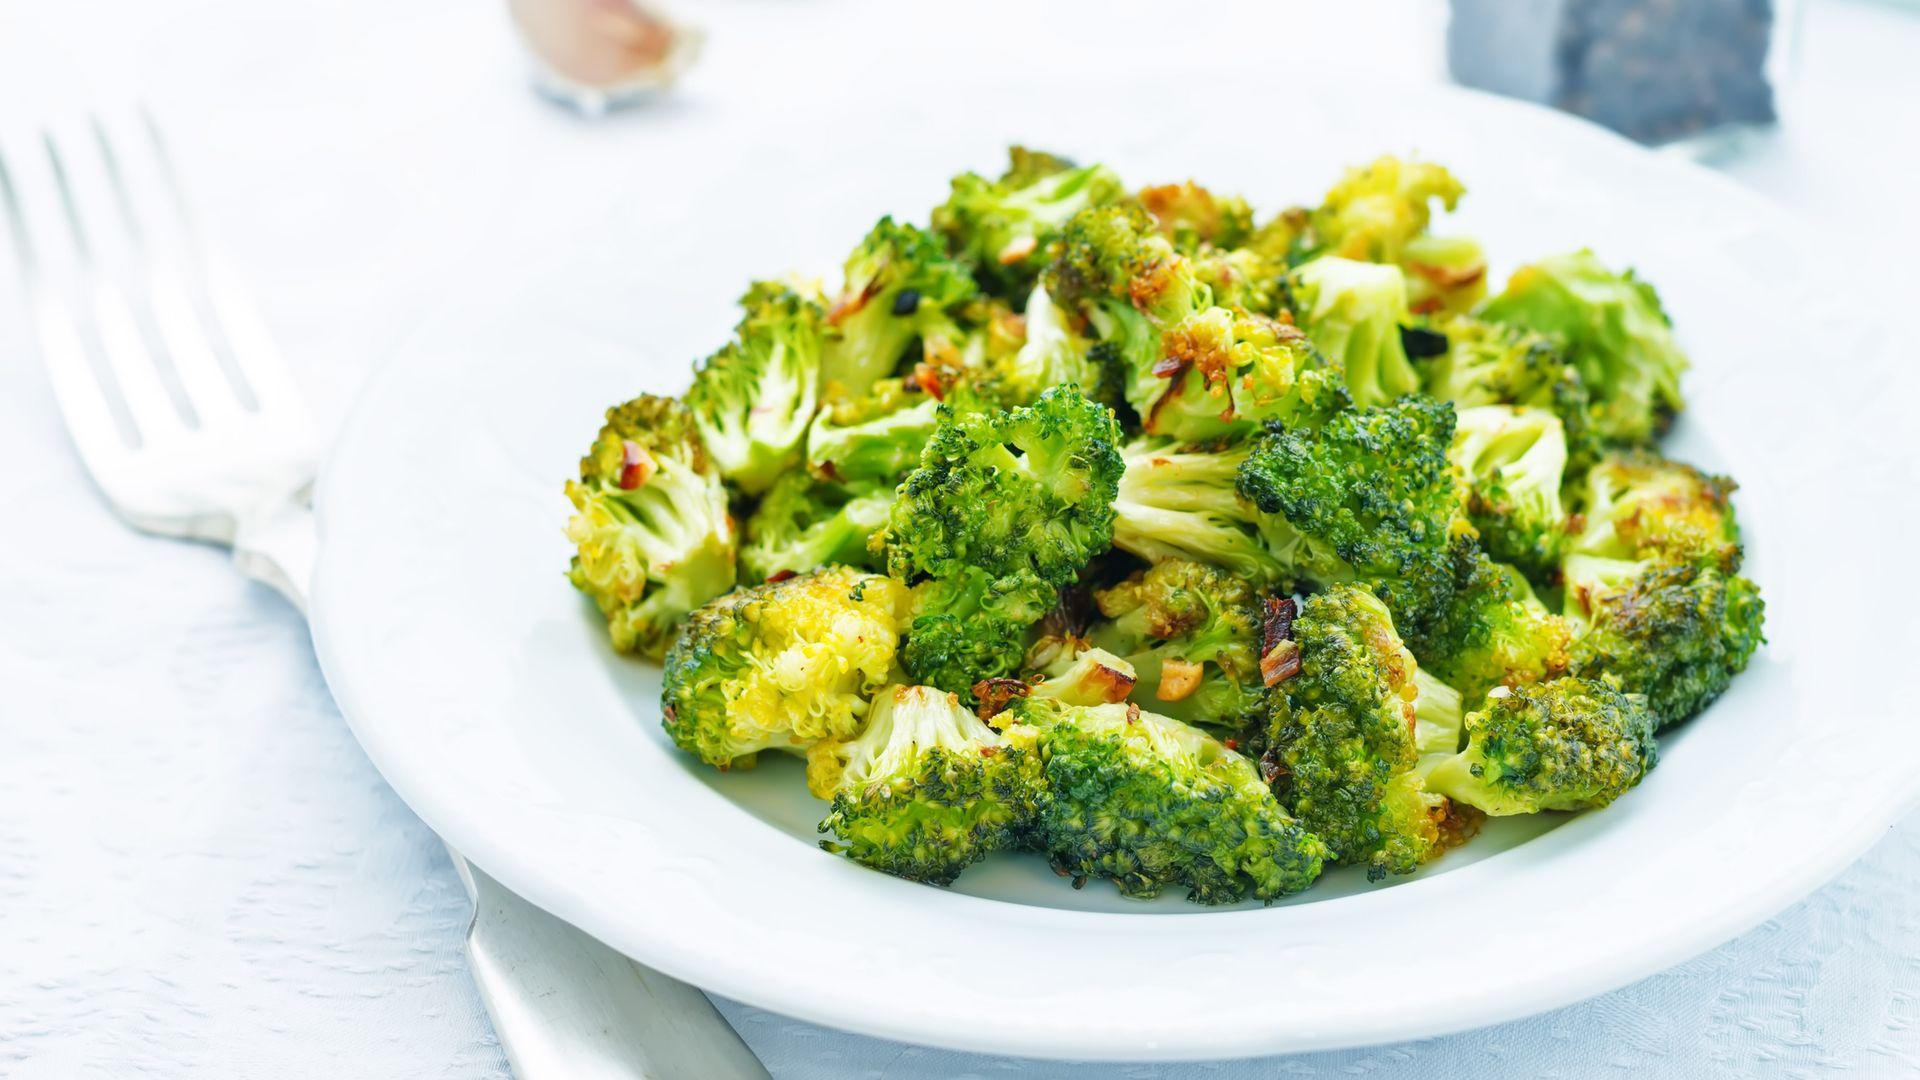 Roasted Broccoli With Pizza Spice Rachael Ray Show,Blue And White Porcelain Tile